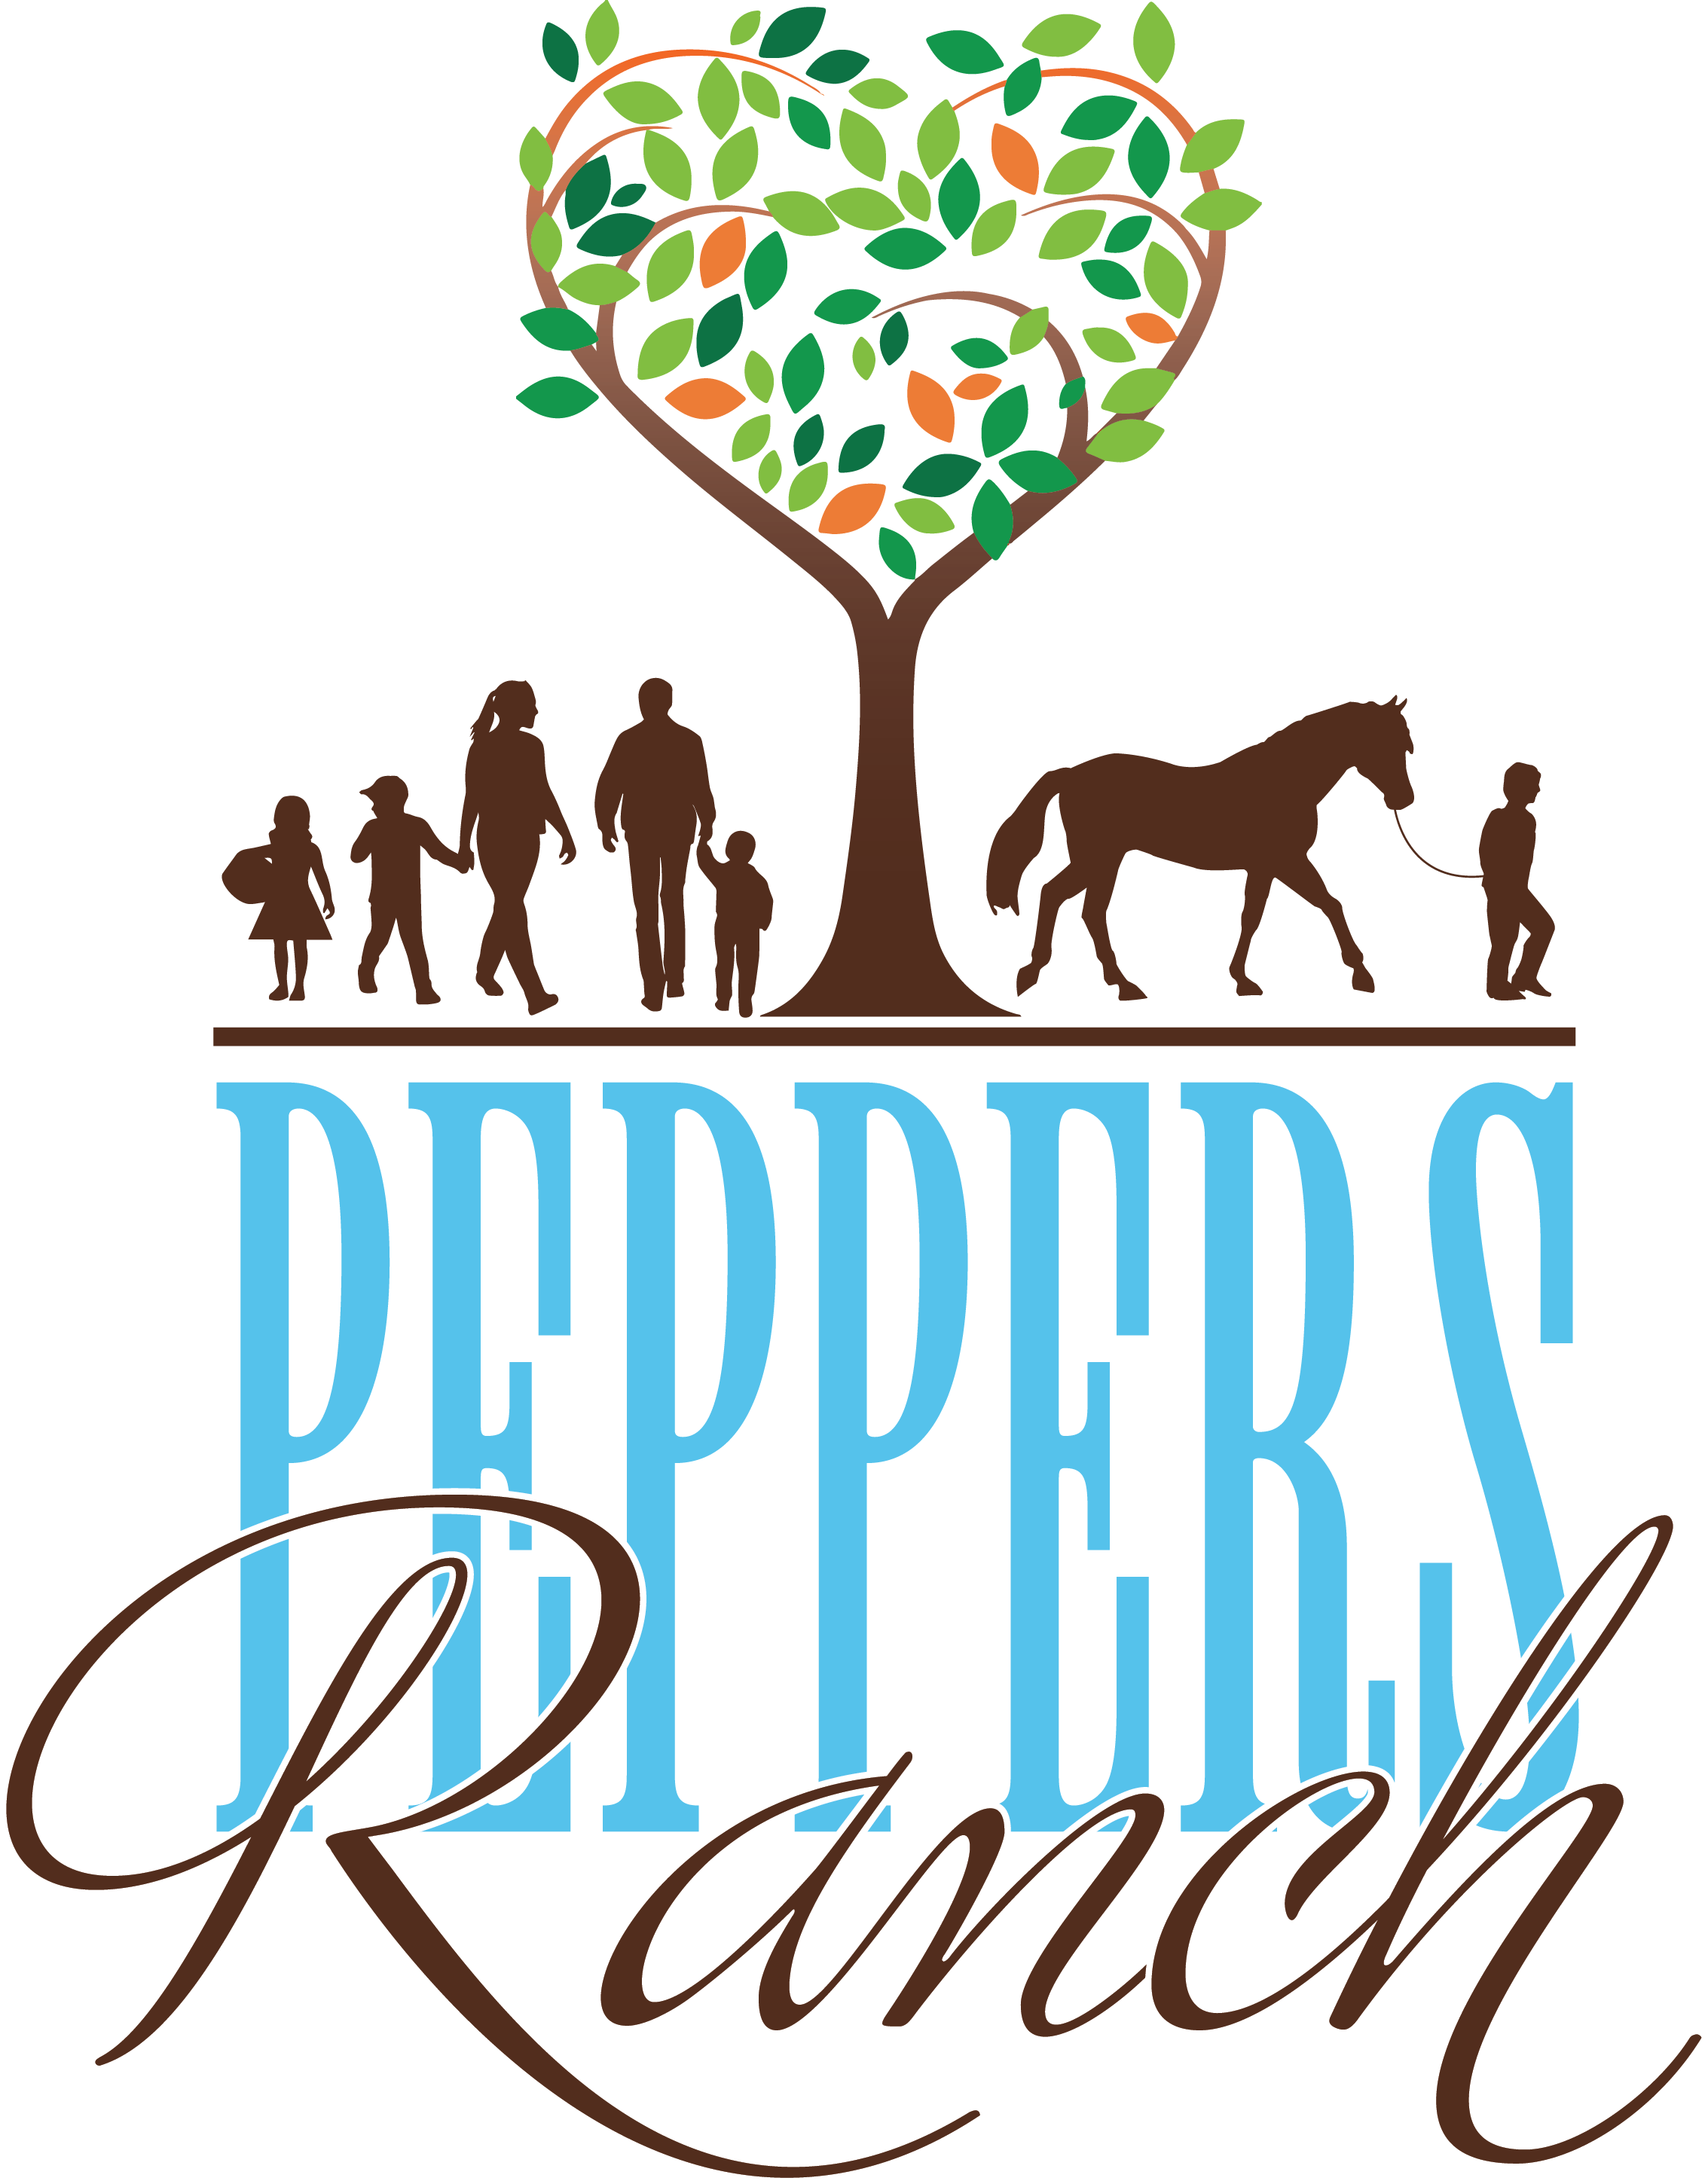 Support clipart foster family. Home peppers ranch